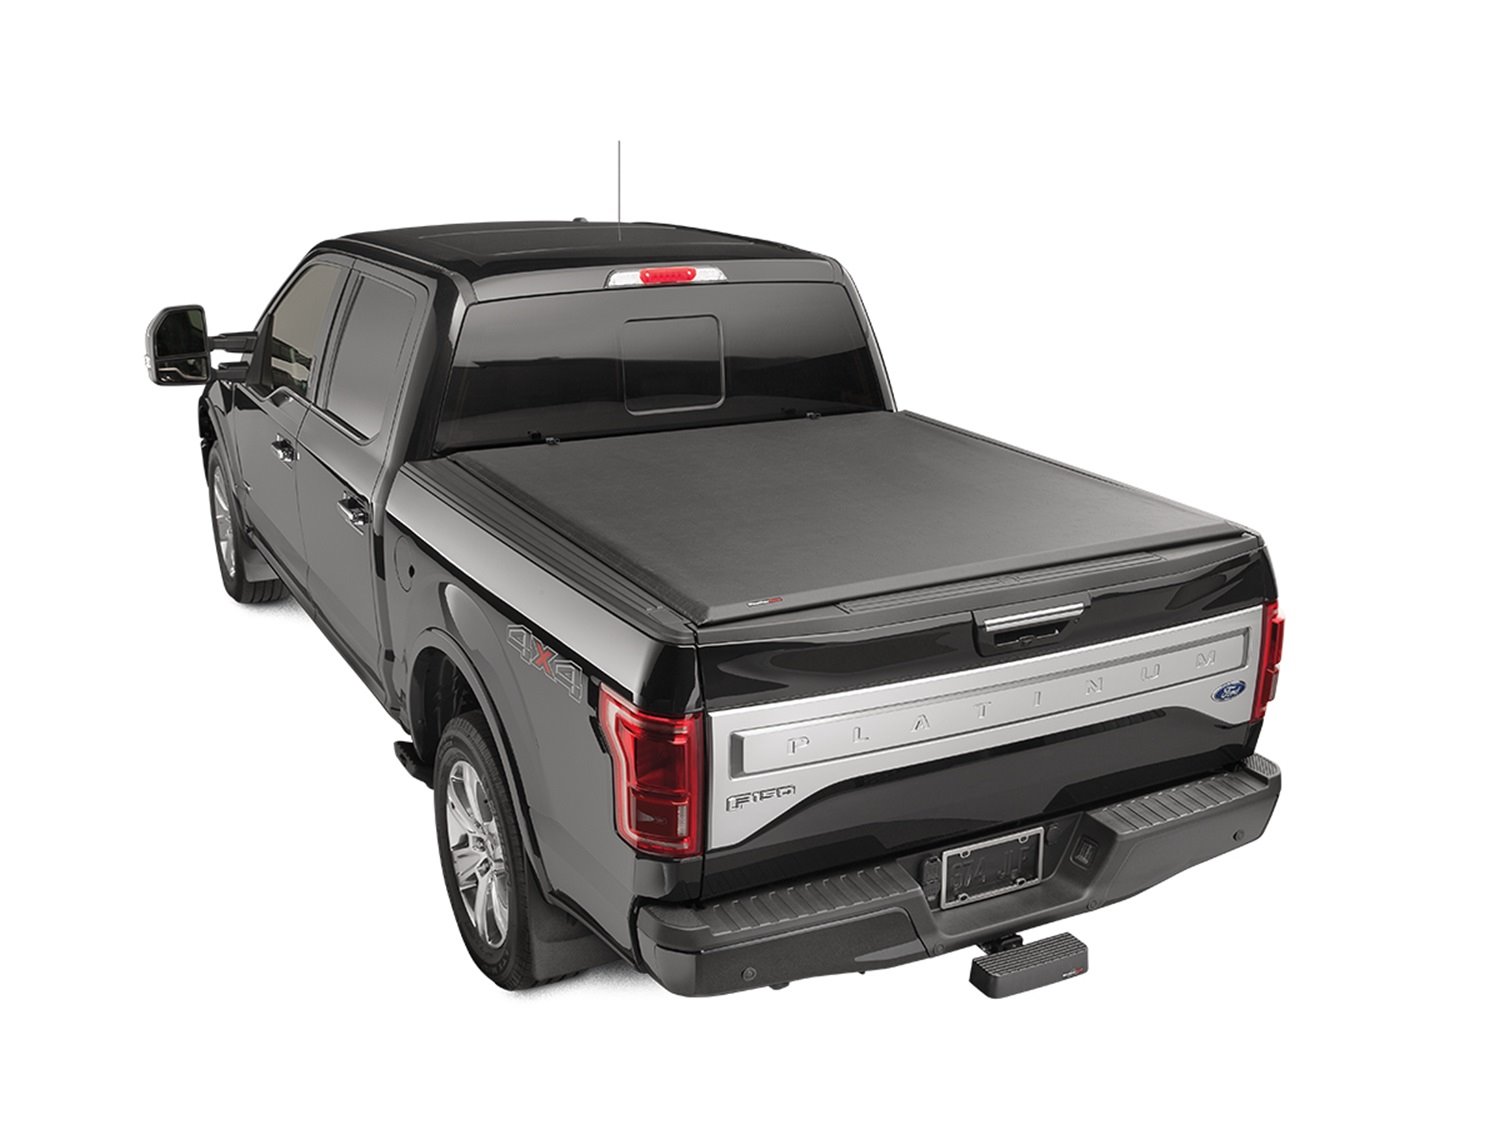 ROLL UP TRUCK BED COVER B TOYOTA TUNDRA 2007-2017 TUNDRA 5 6 BED W/O DECK RAIL